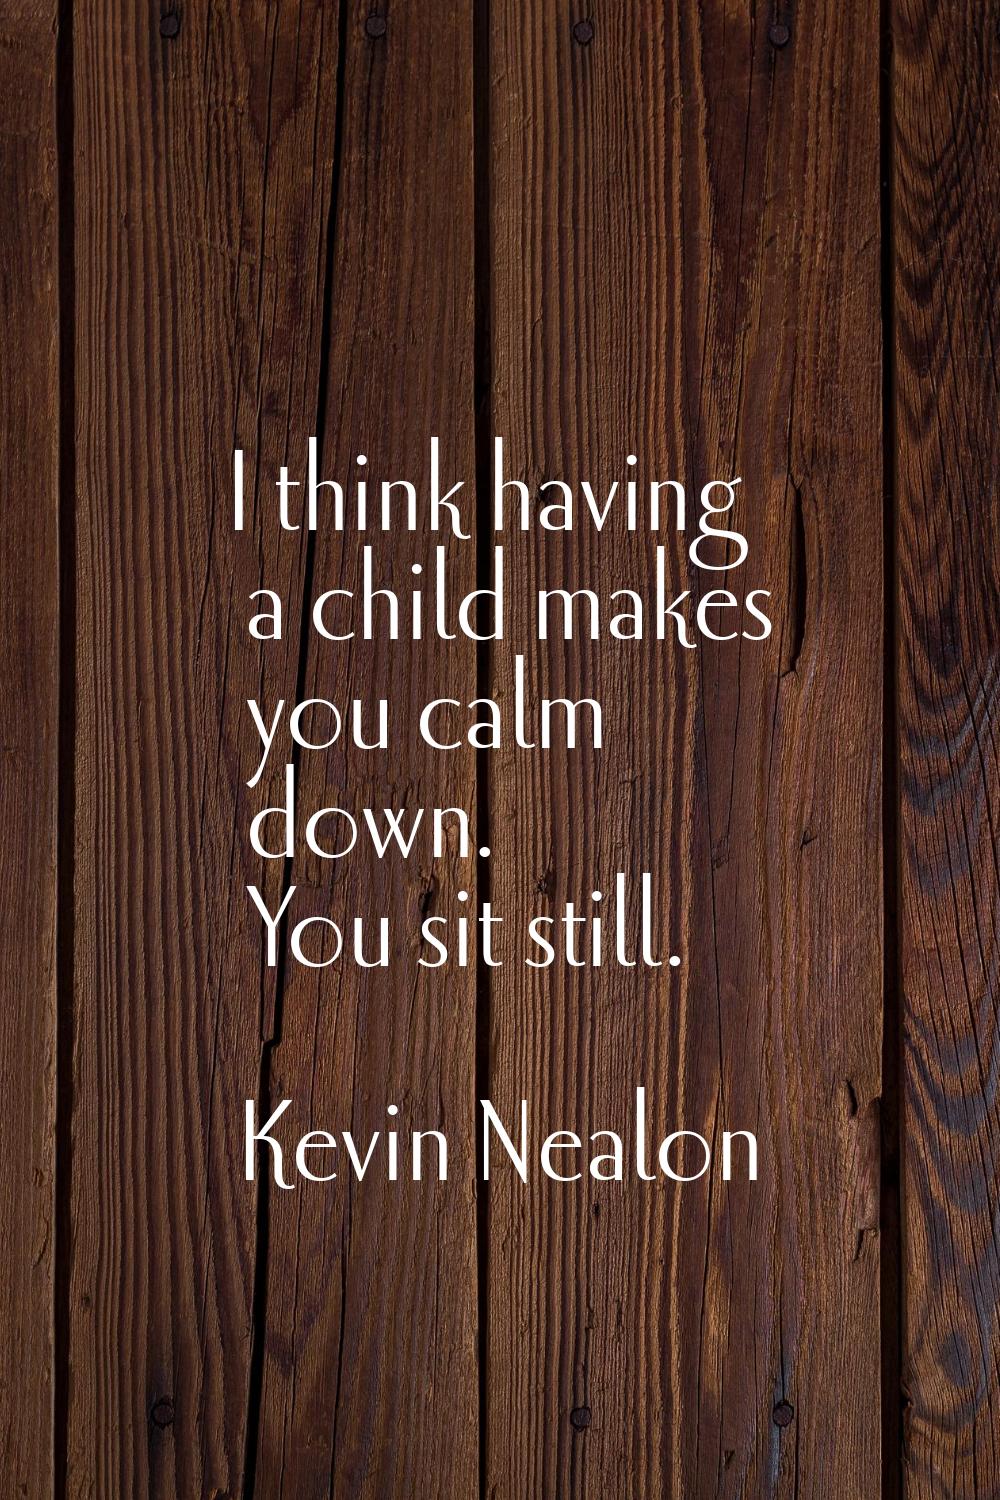 I think having a child makes you calm down. You sit still.